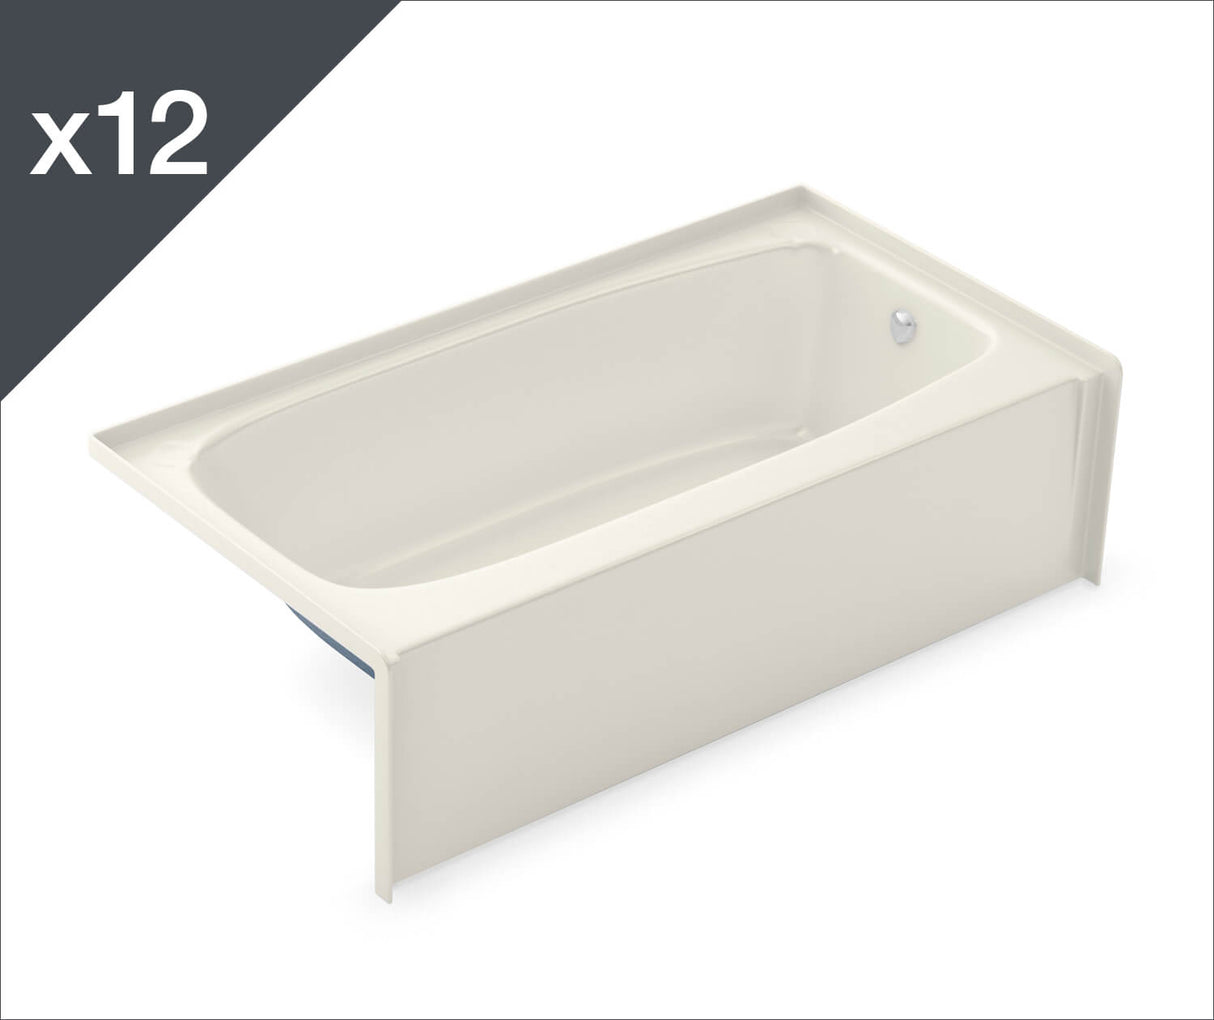 Aker TO-2954 AcrylX Alcove Left-Hand Drain Bath in Biscuit